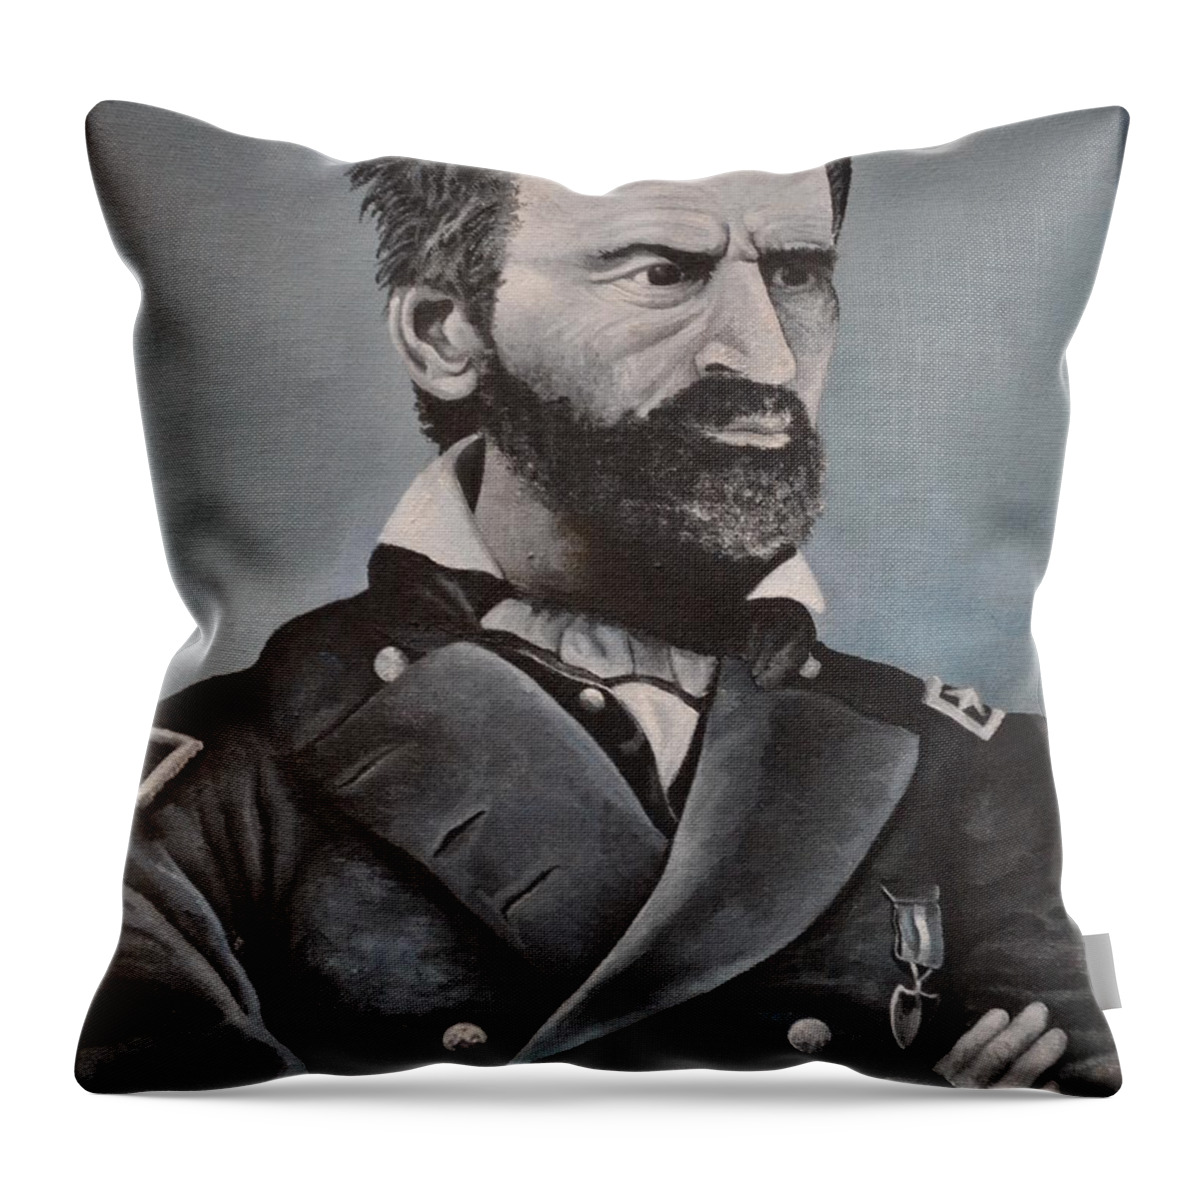 A Black And White Painting Of General Sherman Throw Pillow featuring the painting Union General Sherman by Martin Schmidt